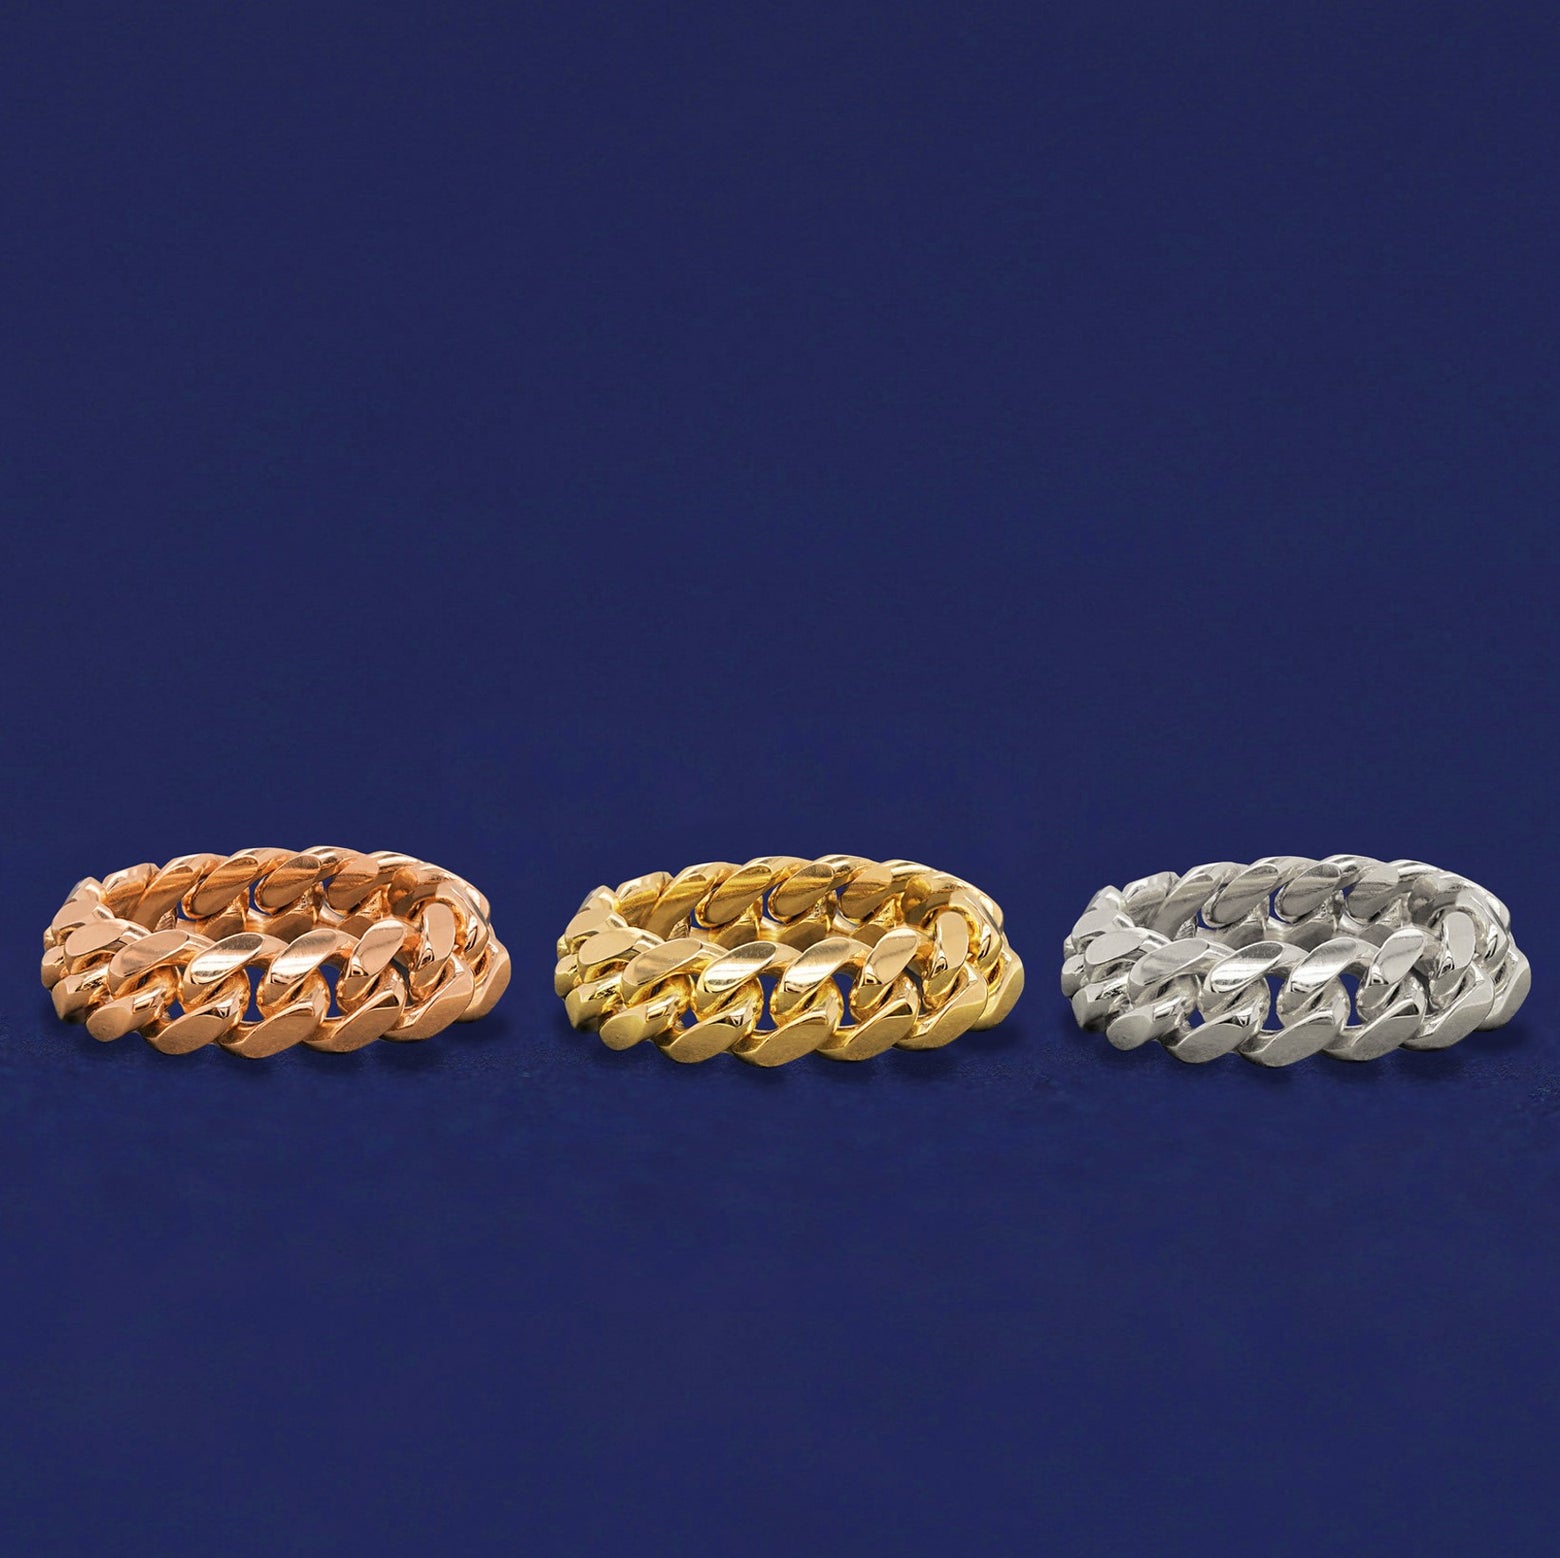 Three versions of the Miami Cuban Ring in options of rose, yellow, and white gold